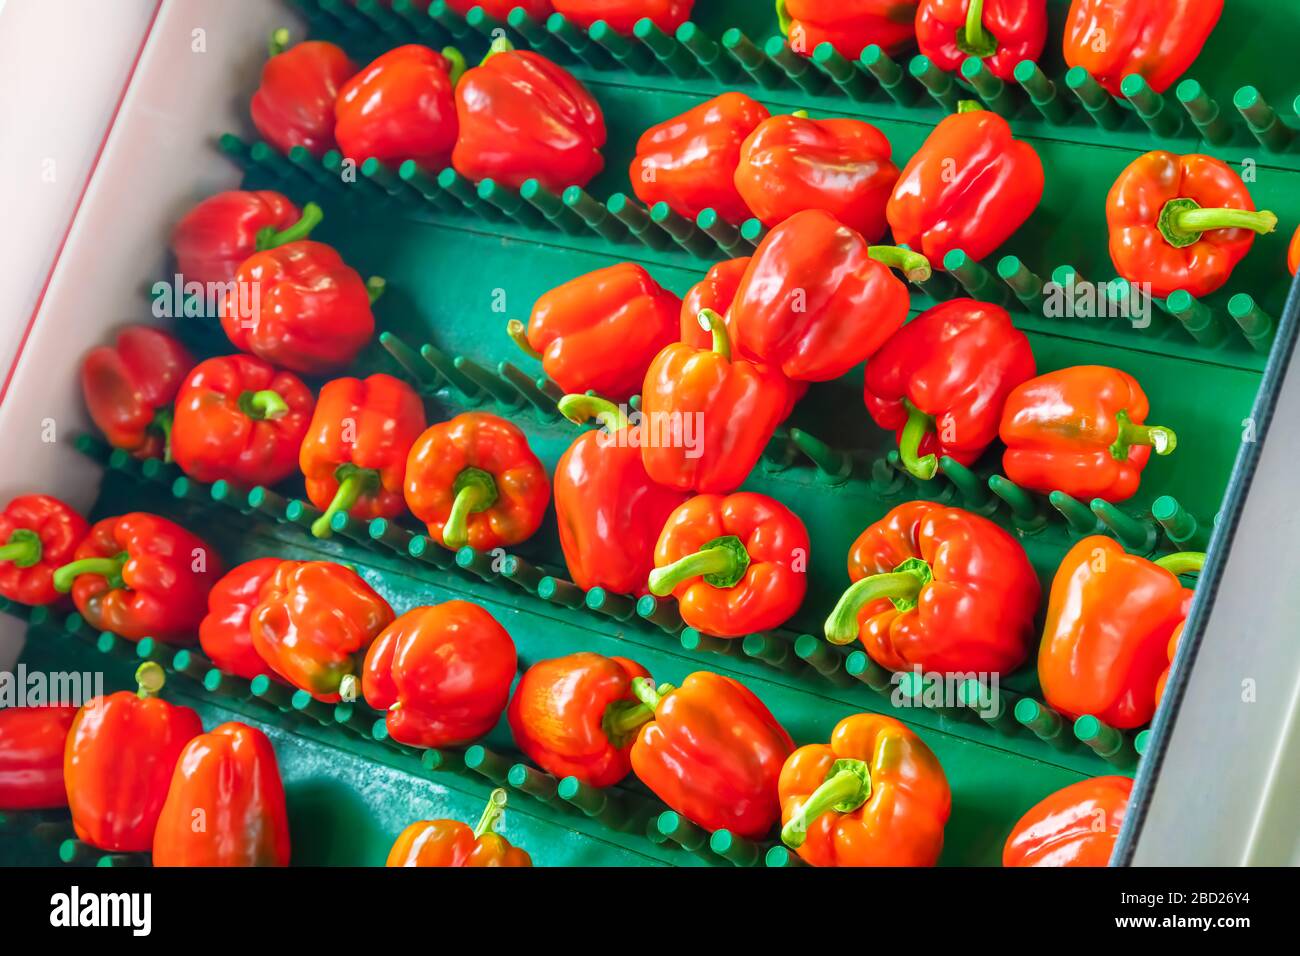 Sorting of red bell peppers on a conveyor belt during harvest Stock Photo